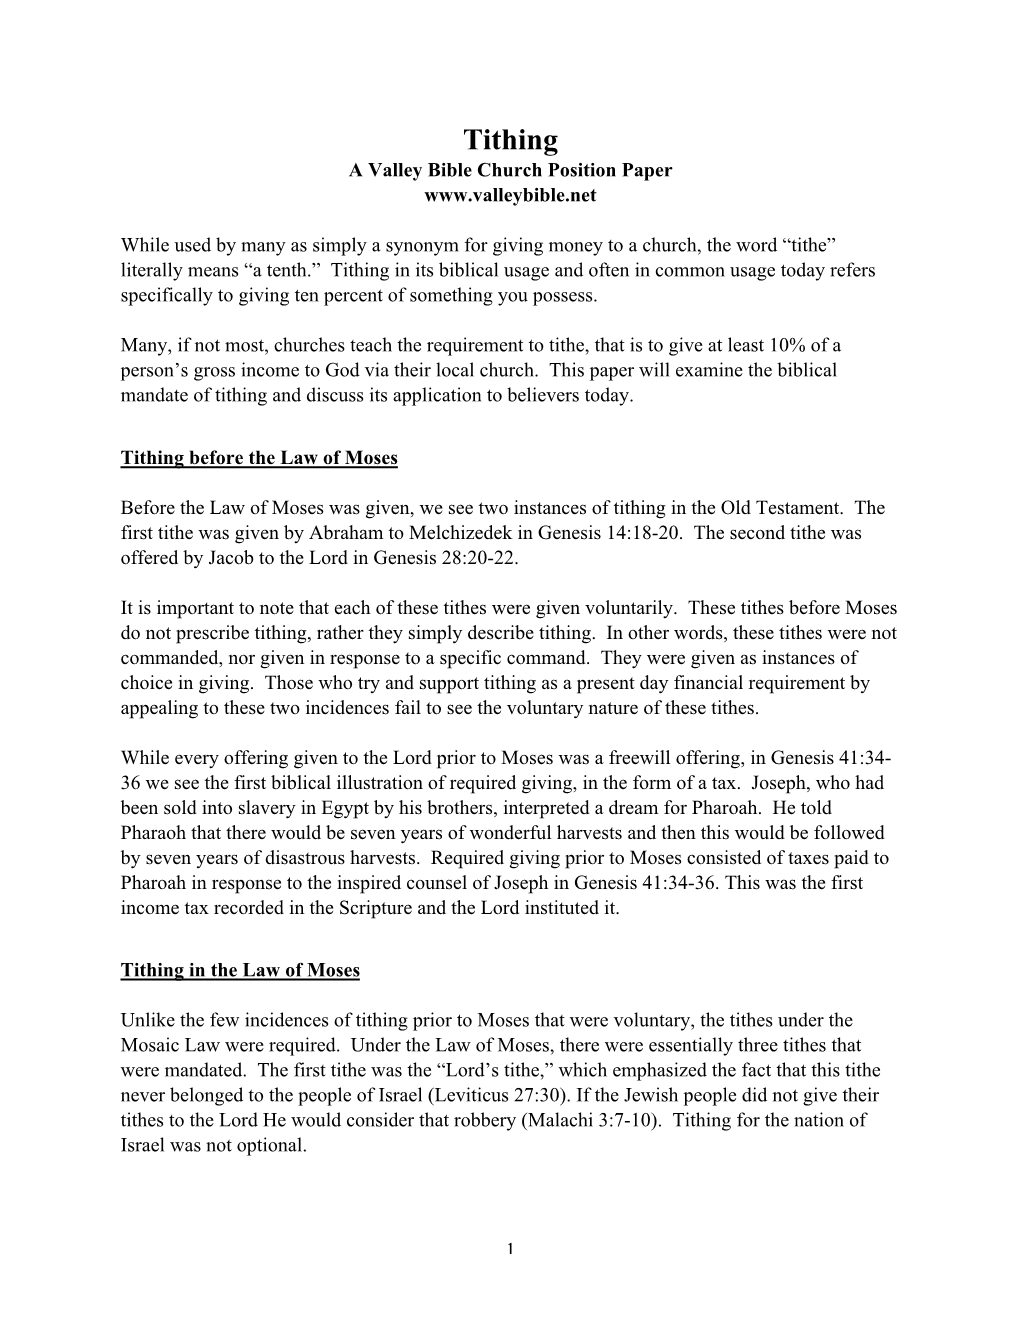 Tithing a Valley Bible Church Position Paper